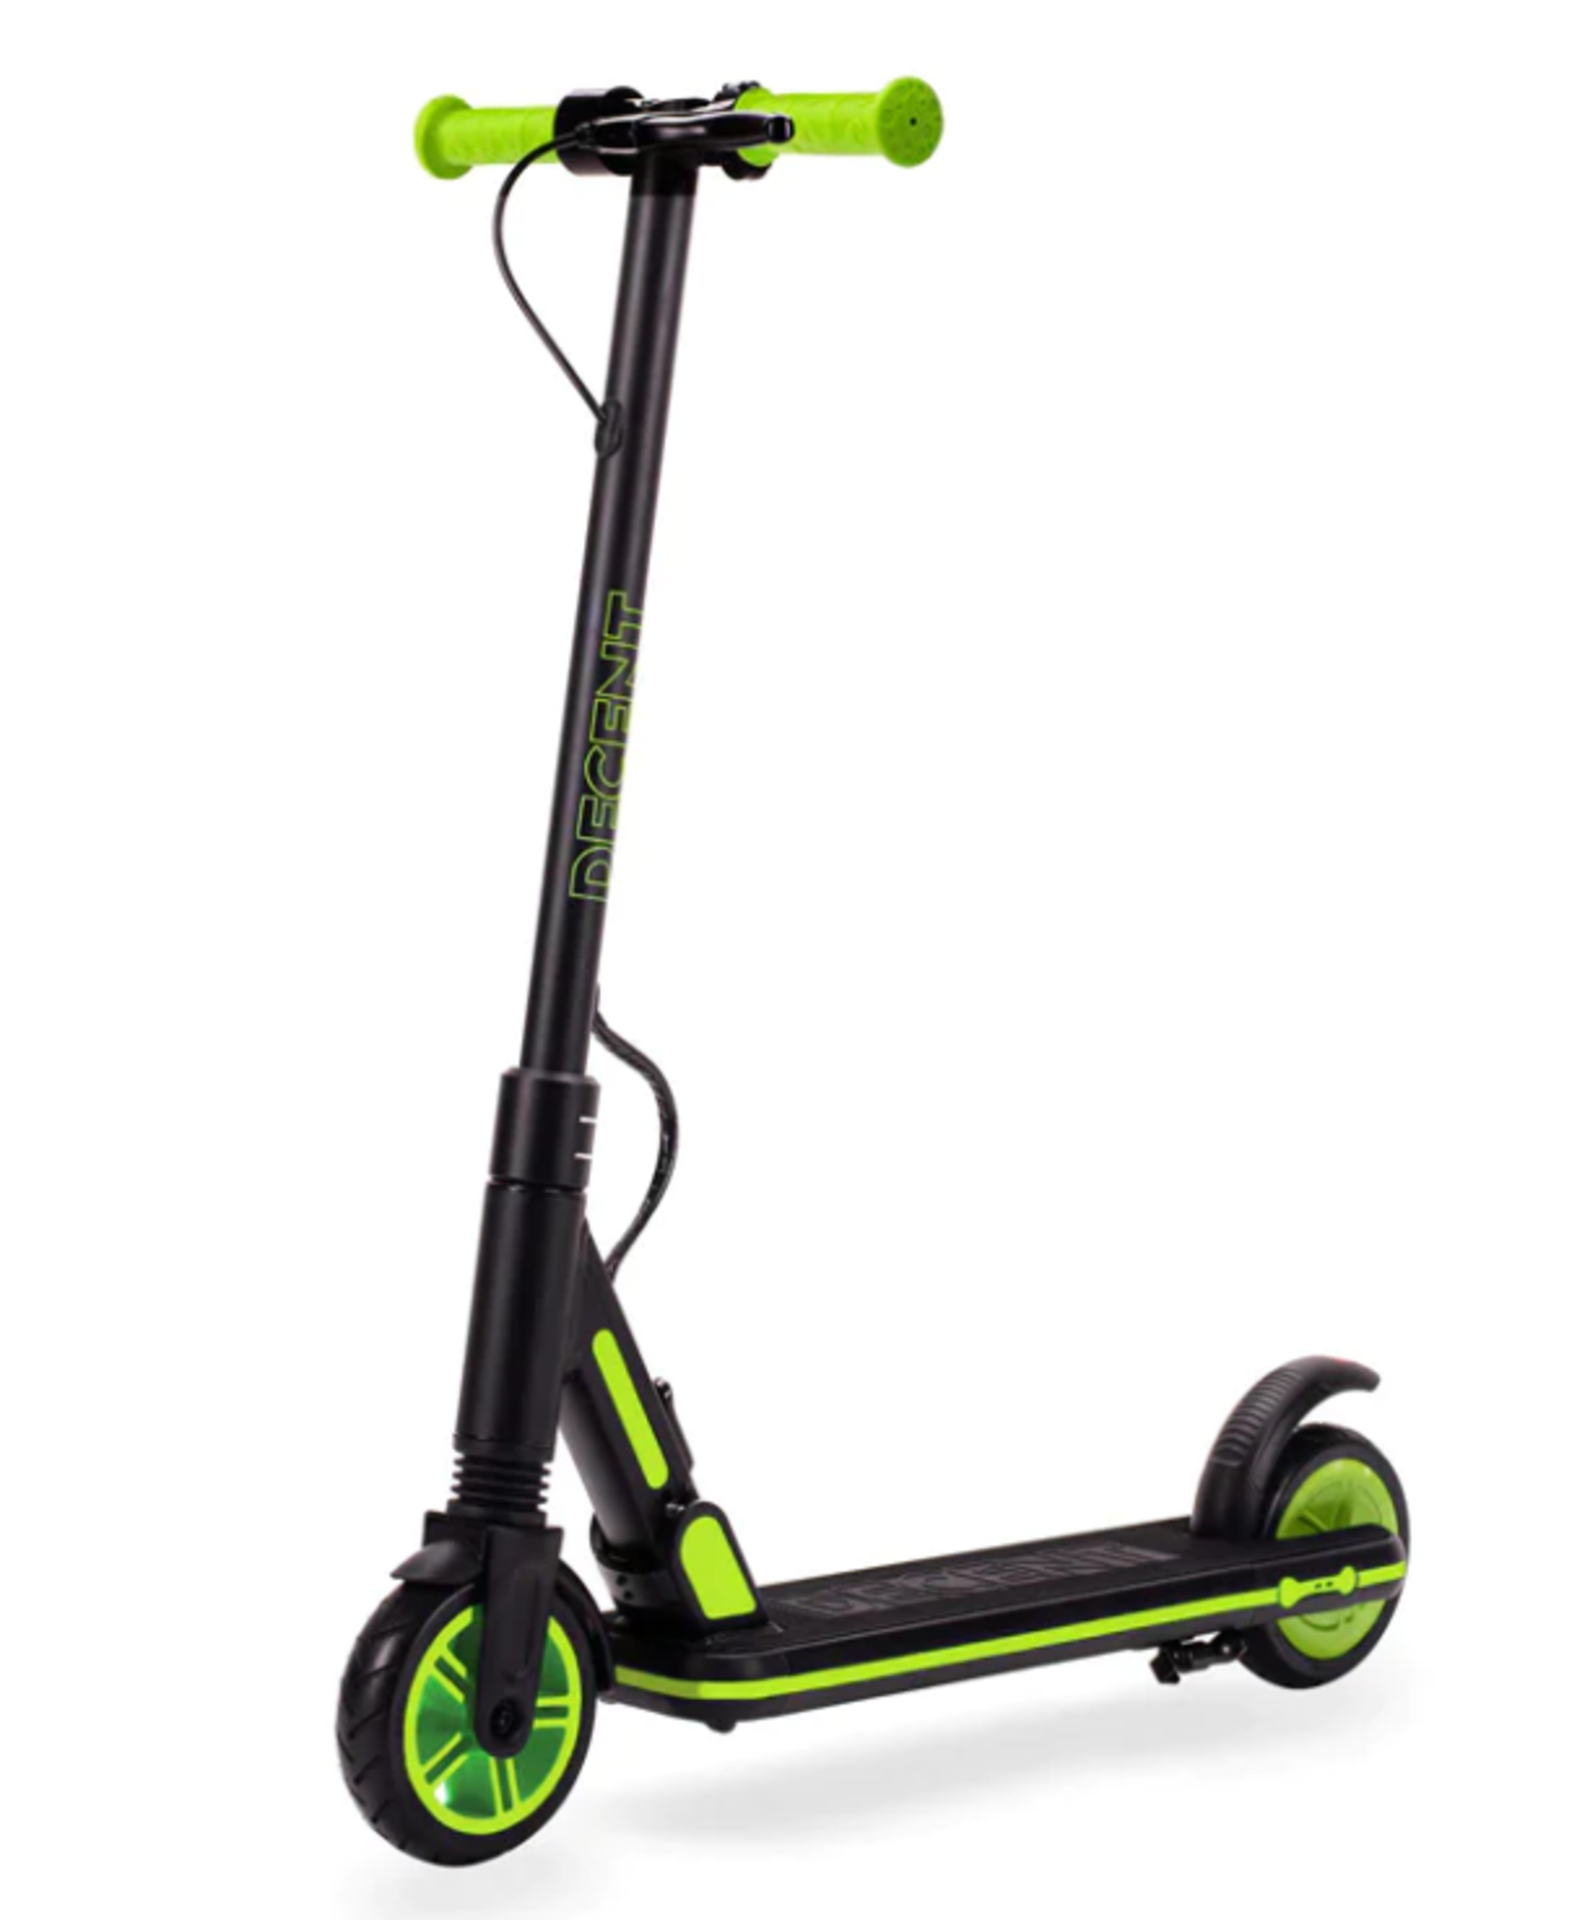 New & Boxed DECENT Kids Electric Scooter - Blue/Green. Let your kids zip around in style. With